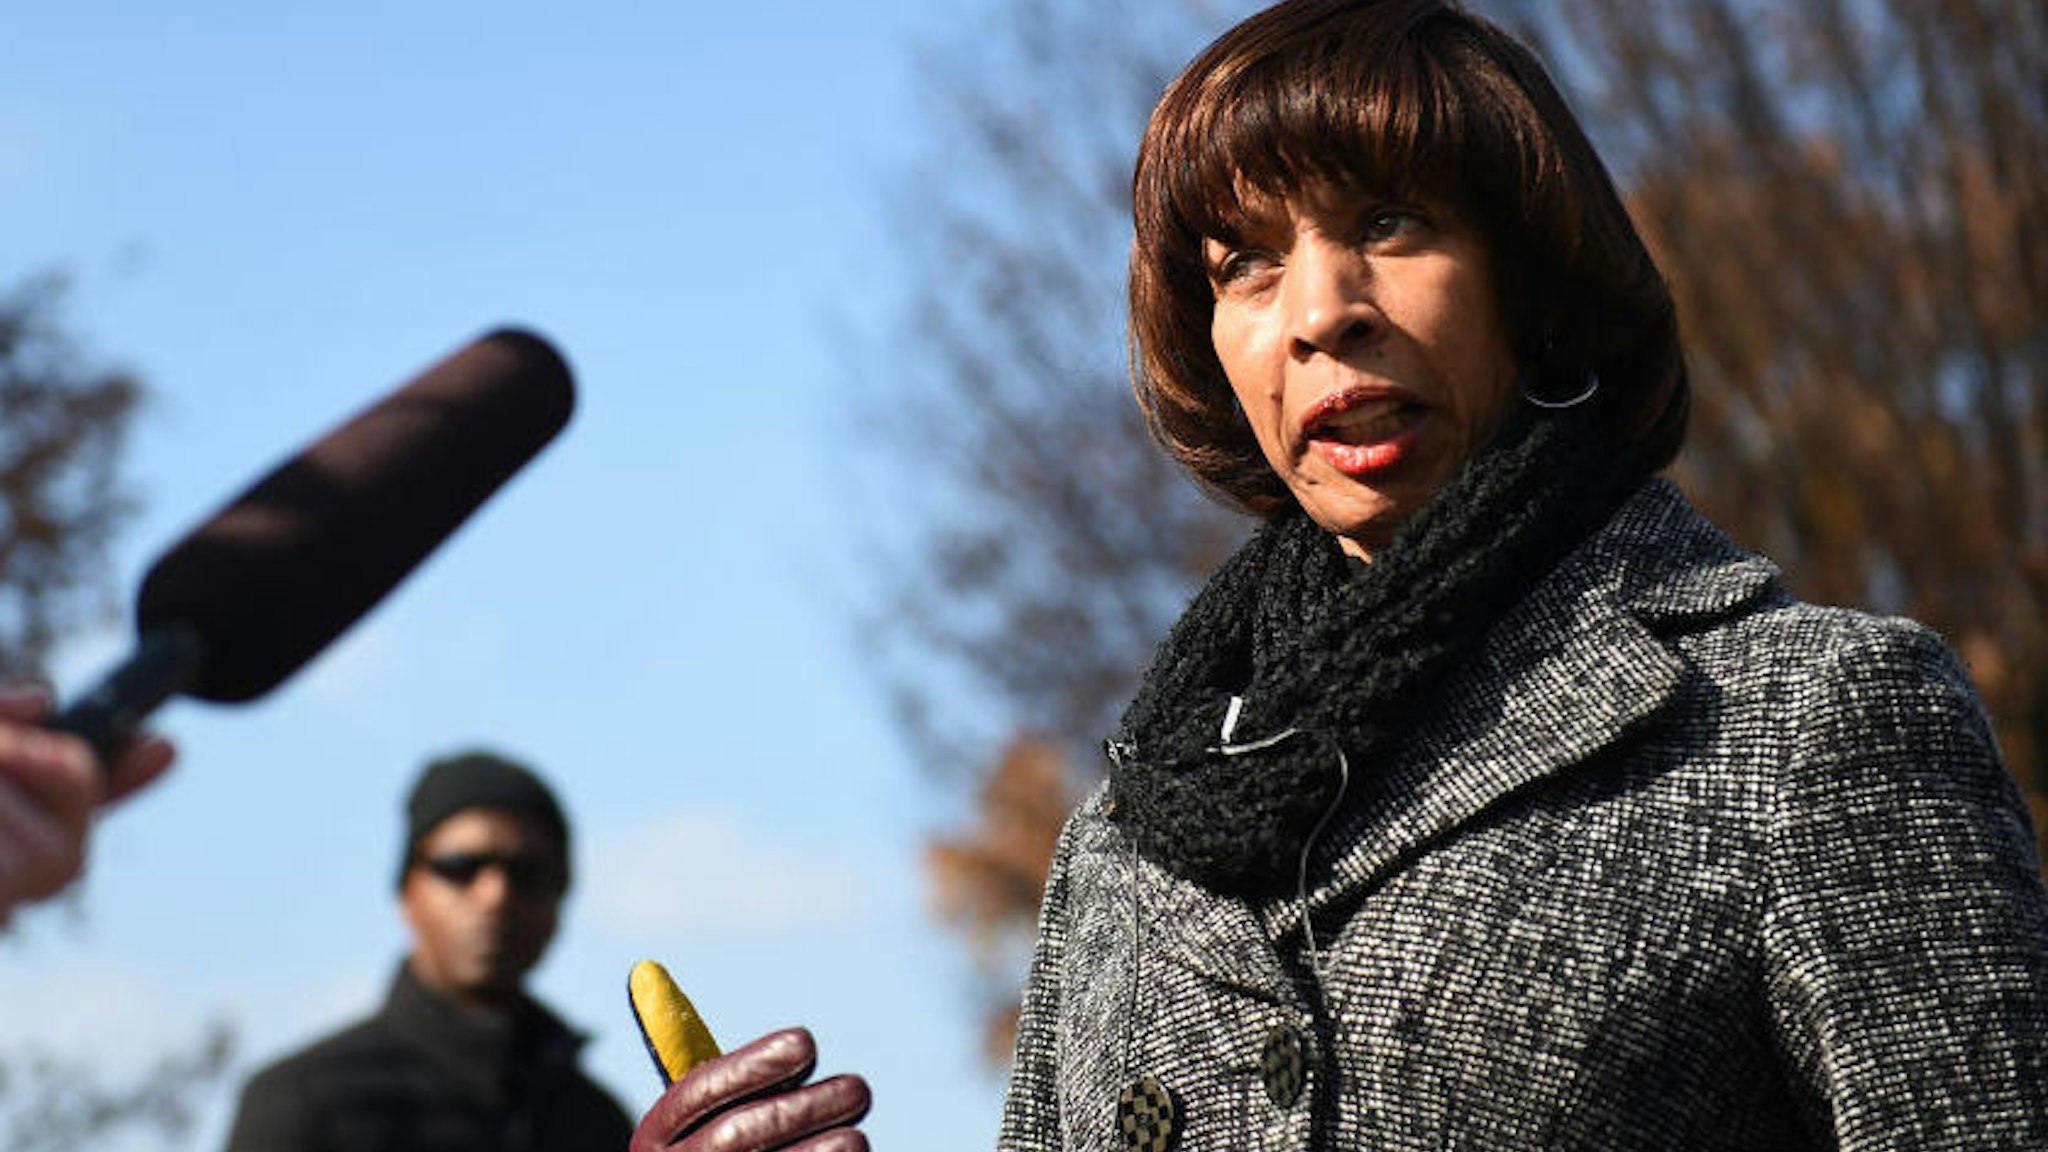 BALTIMORE, MD - DECEMBER 3: Baltimore Mayor Catherine Pugh marches in the Mayor's Annual Christmas parade in Hampden, Baltimore, MD, December 3, 2017. Baltimore recently topped 300 murders and Pugh faces other problems of poverty and drugs.